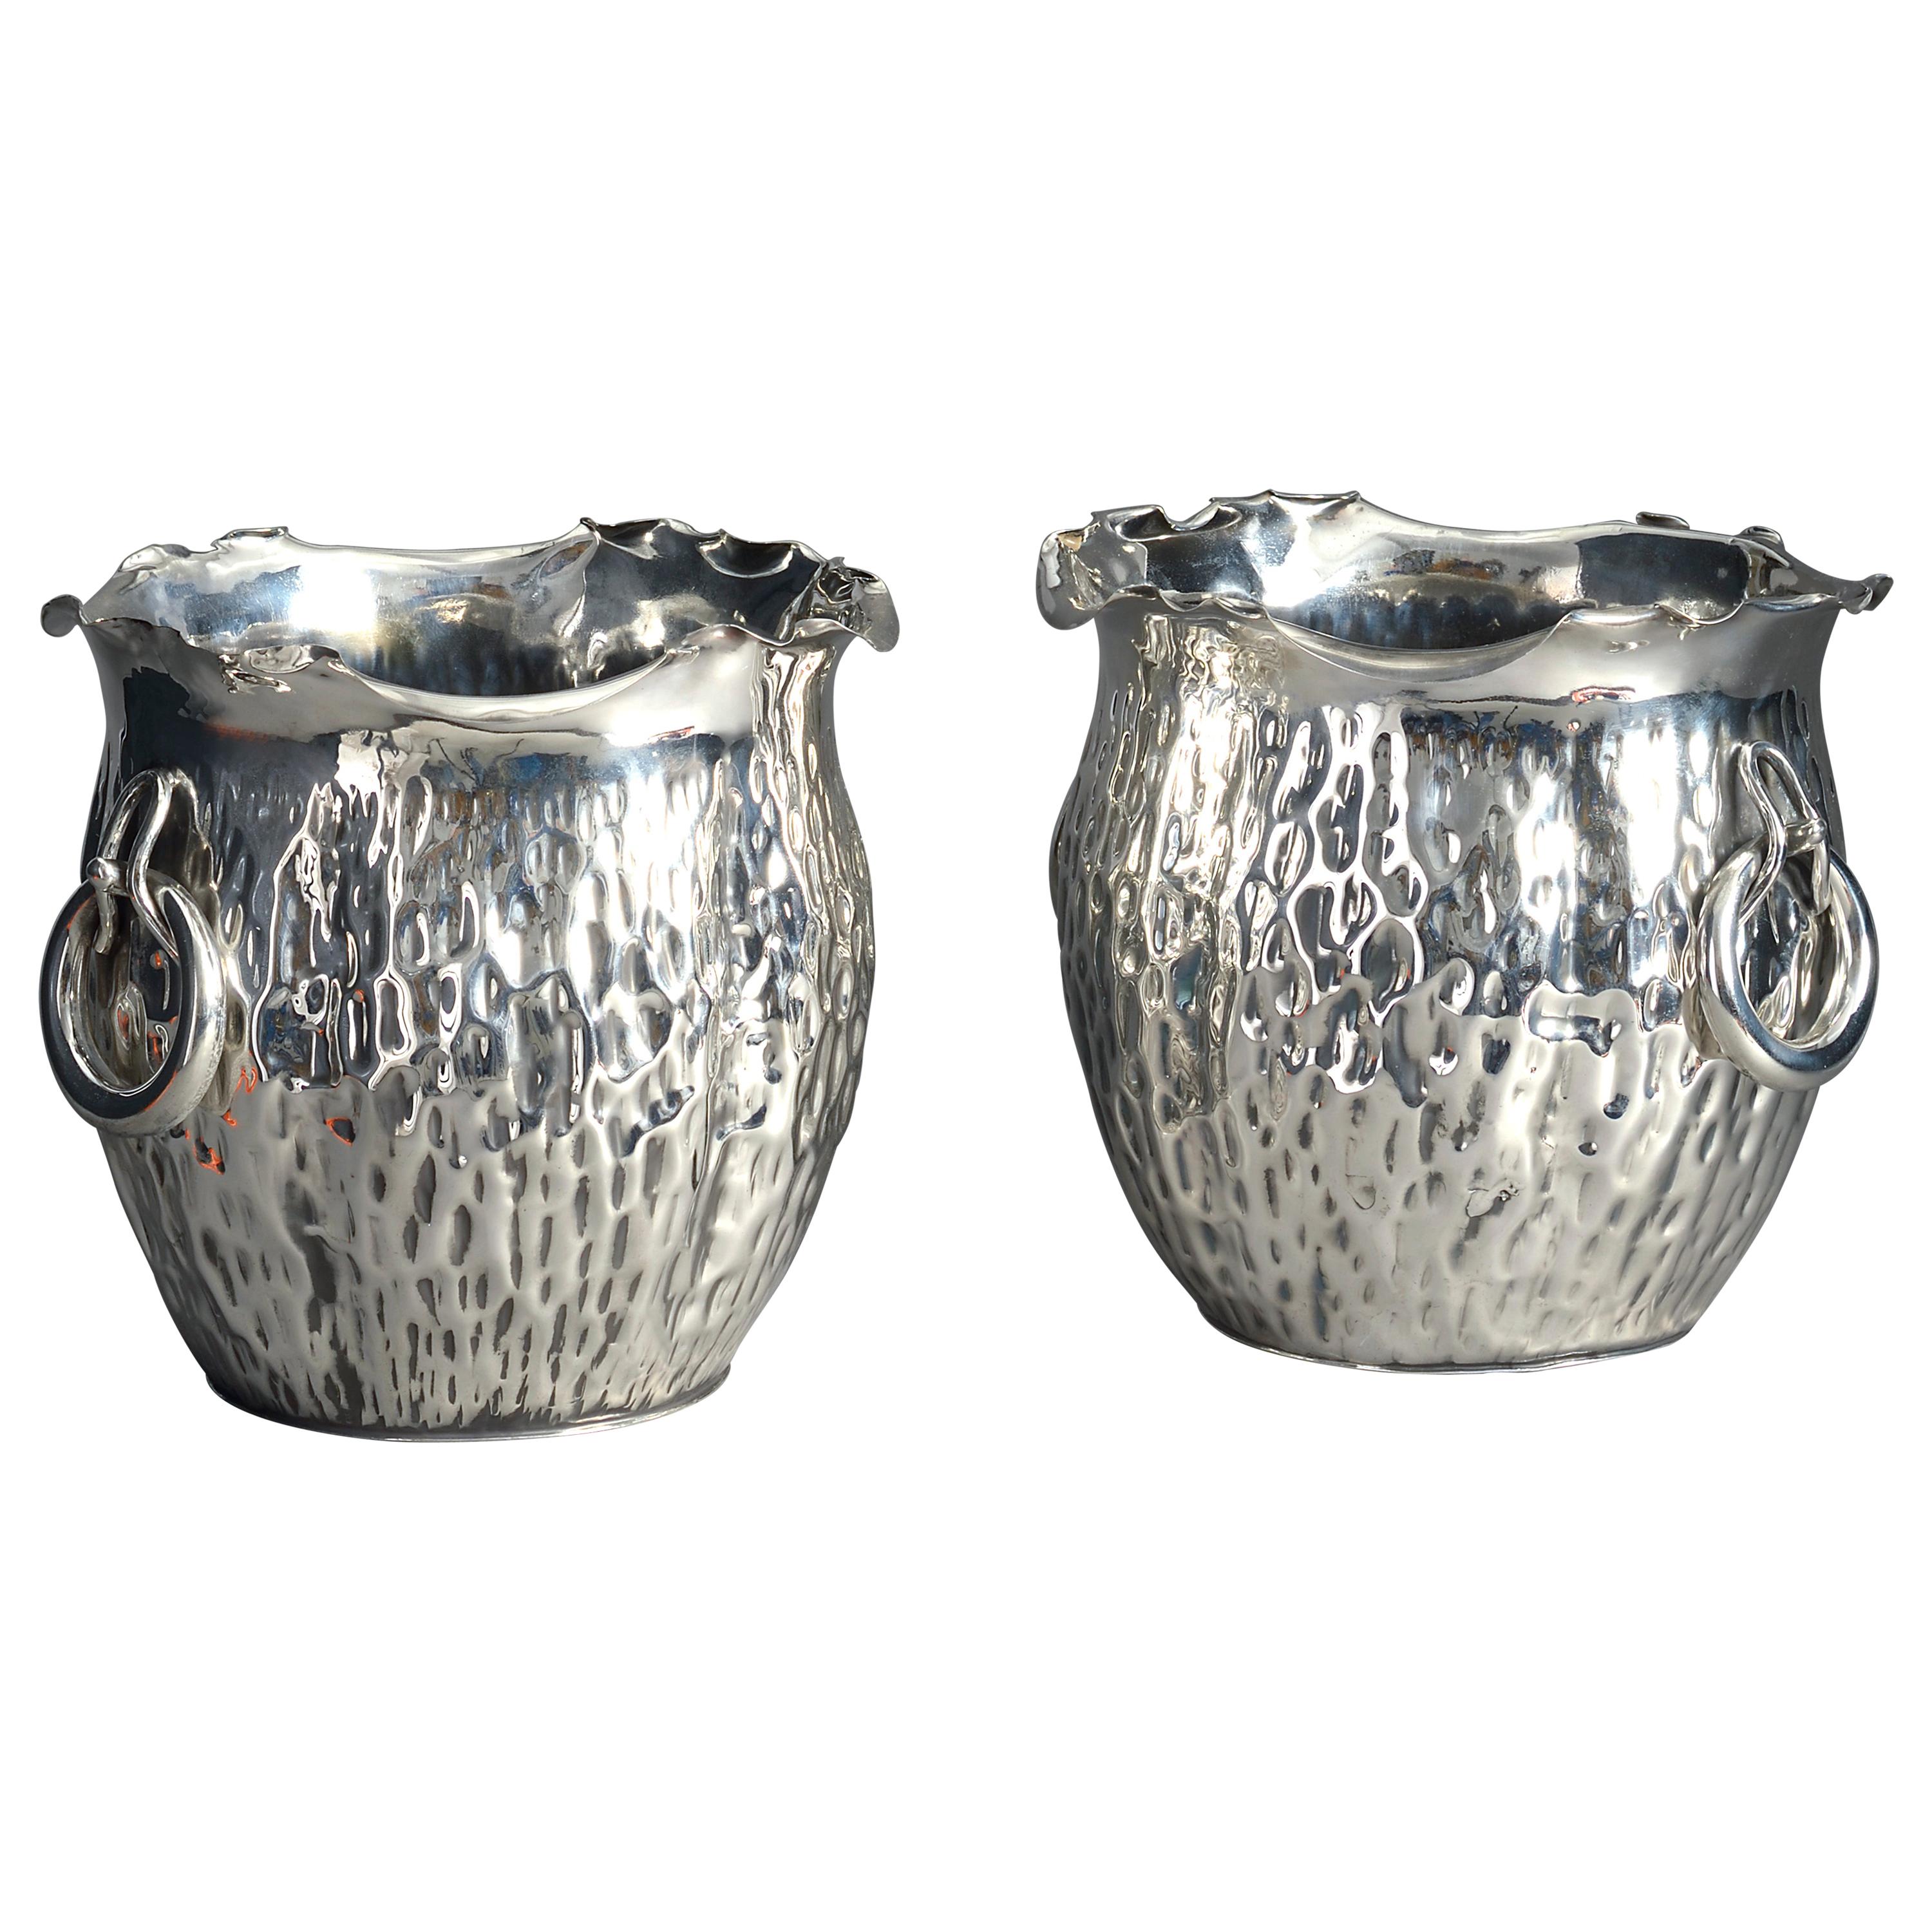 Pair of 19th Century Silver Planters or Coolers by Hukin & Heath For Sale